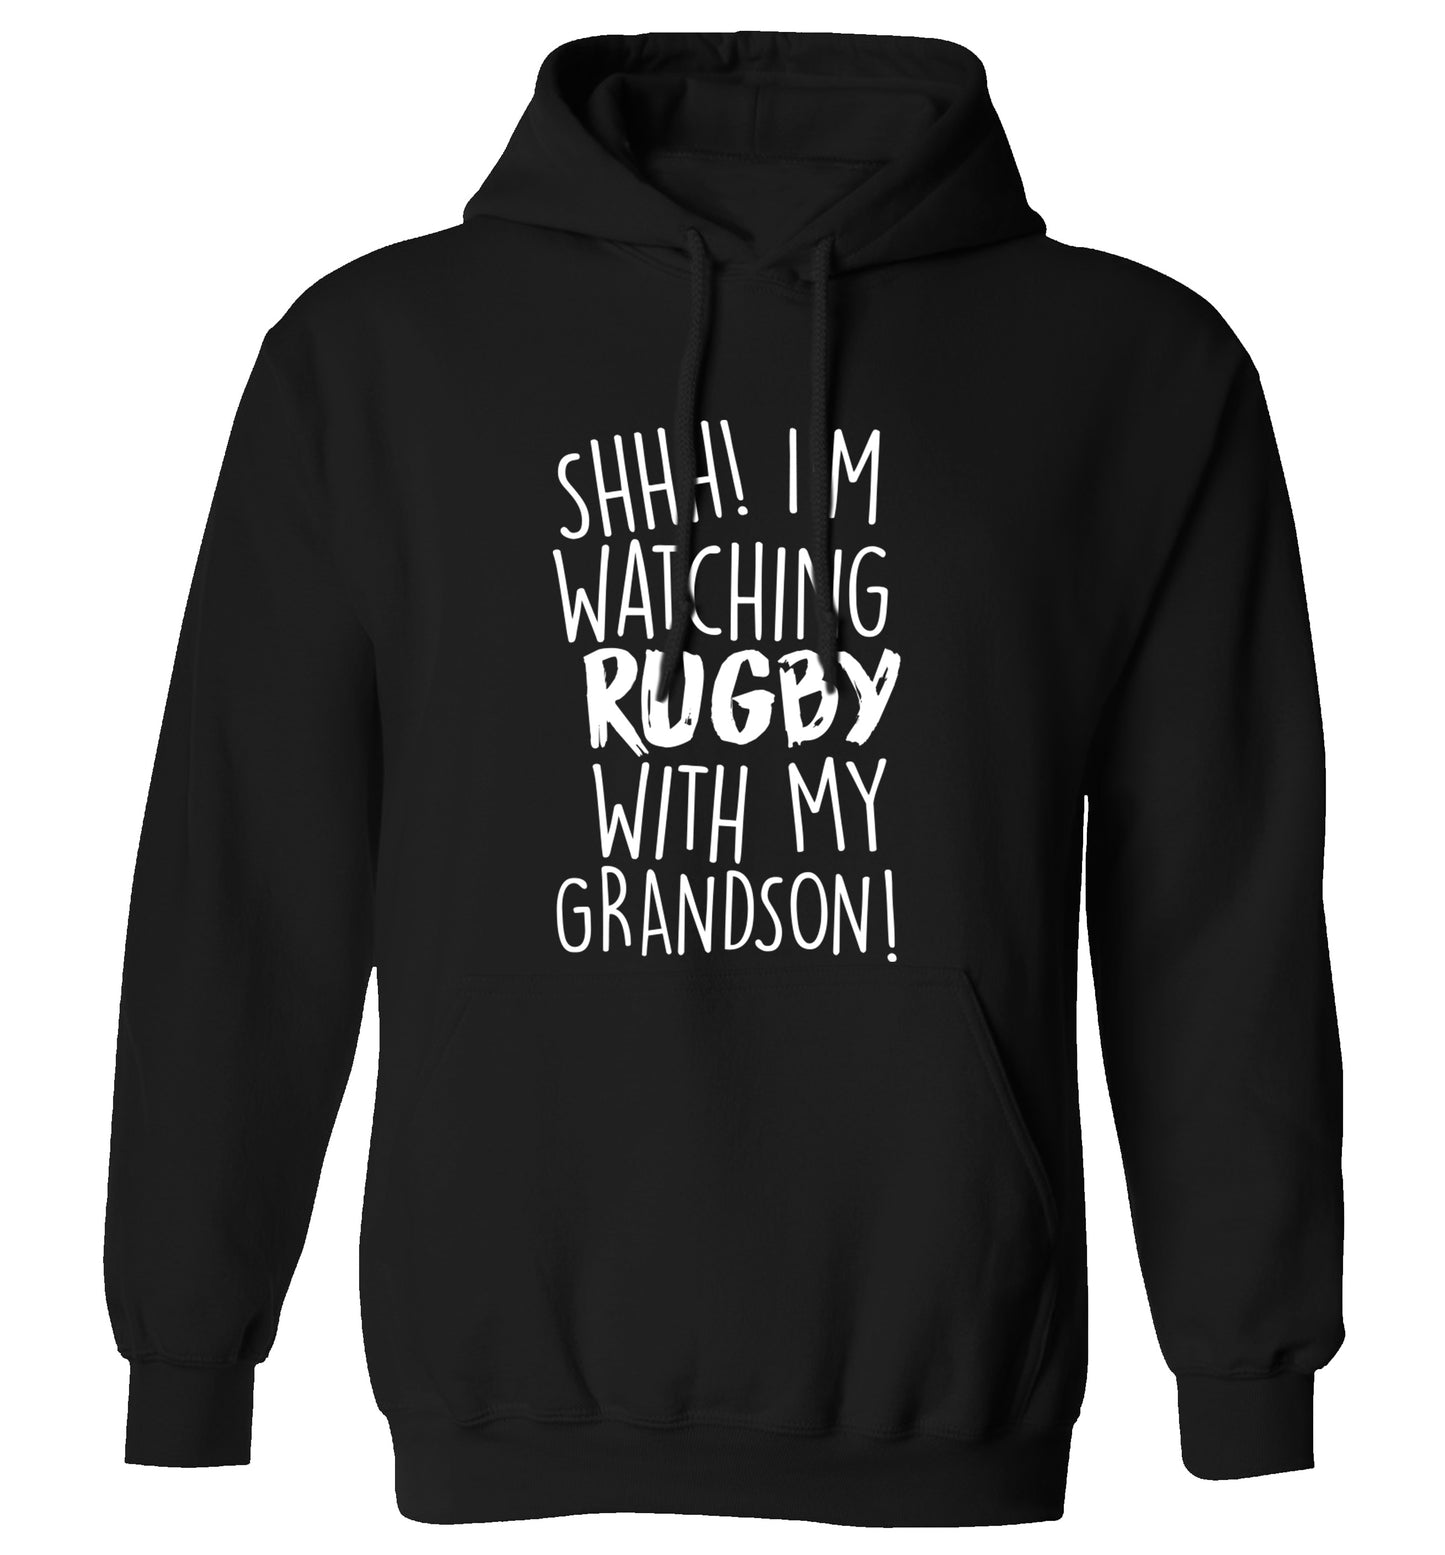 Shh I'm watching rugby with my grandson adults unisex black hoodie 2XL